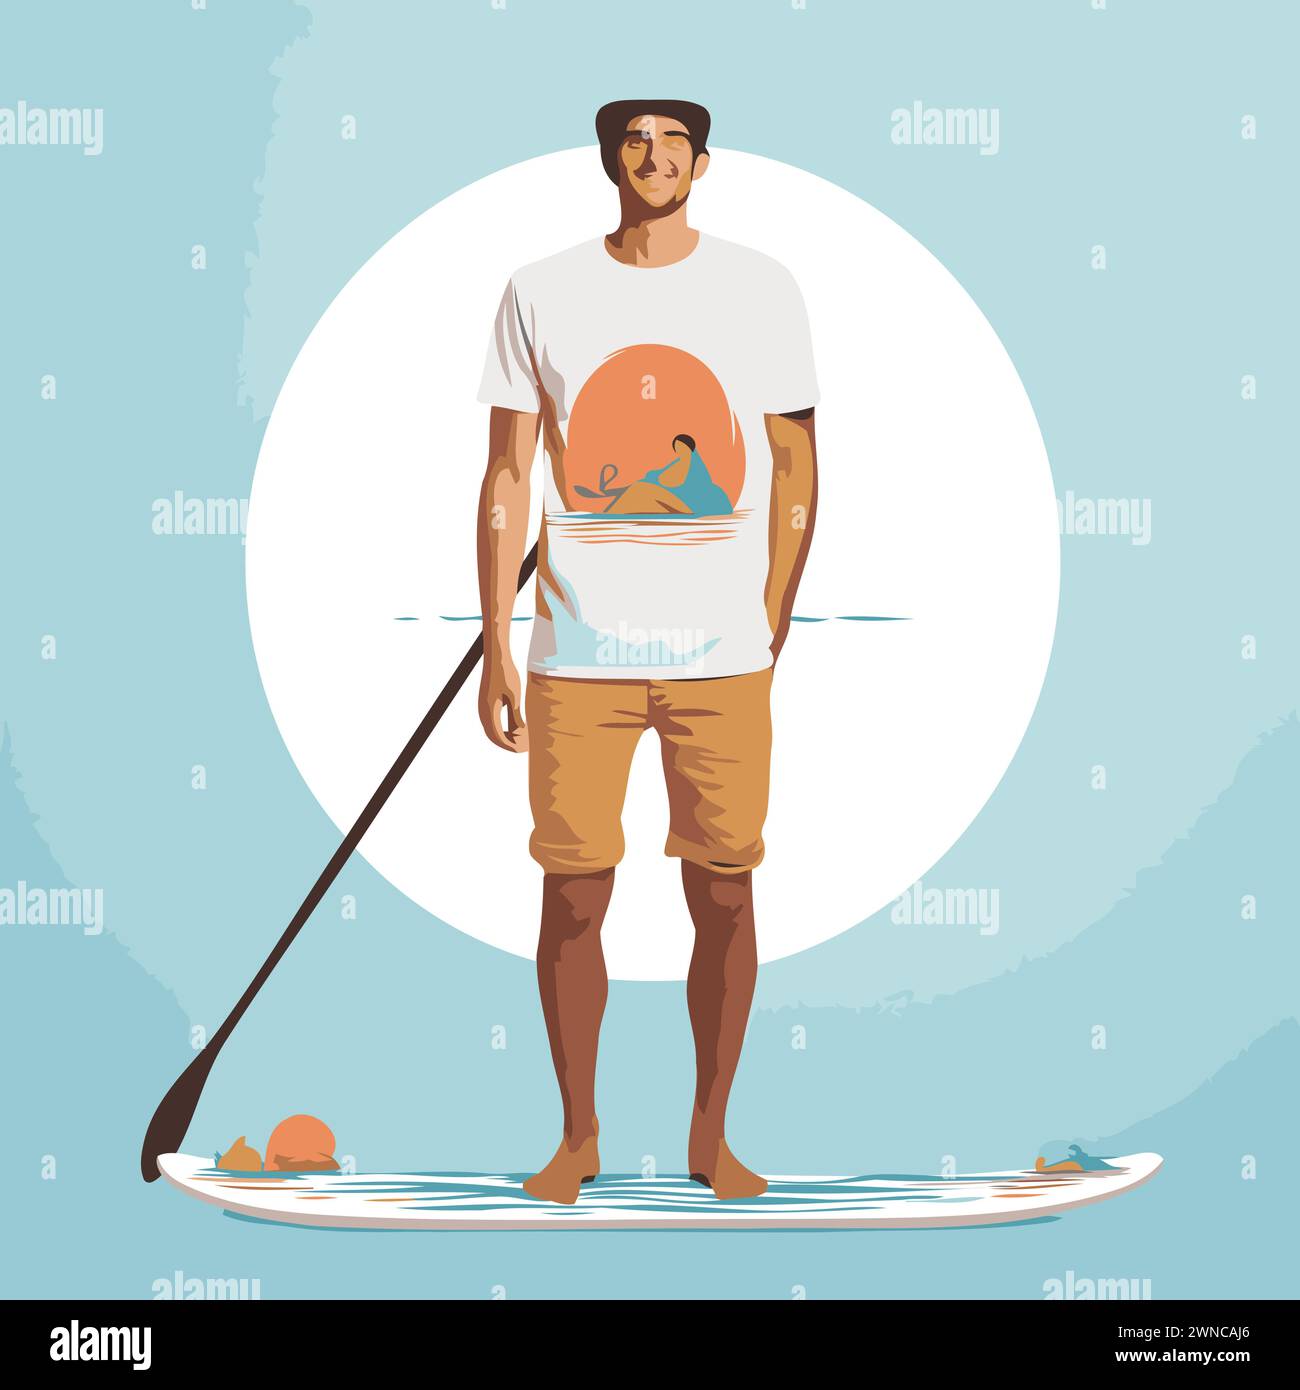 Man on stand up paddle board. vector illustration. Flat design. Stock Vector